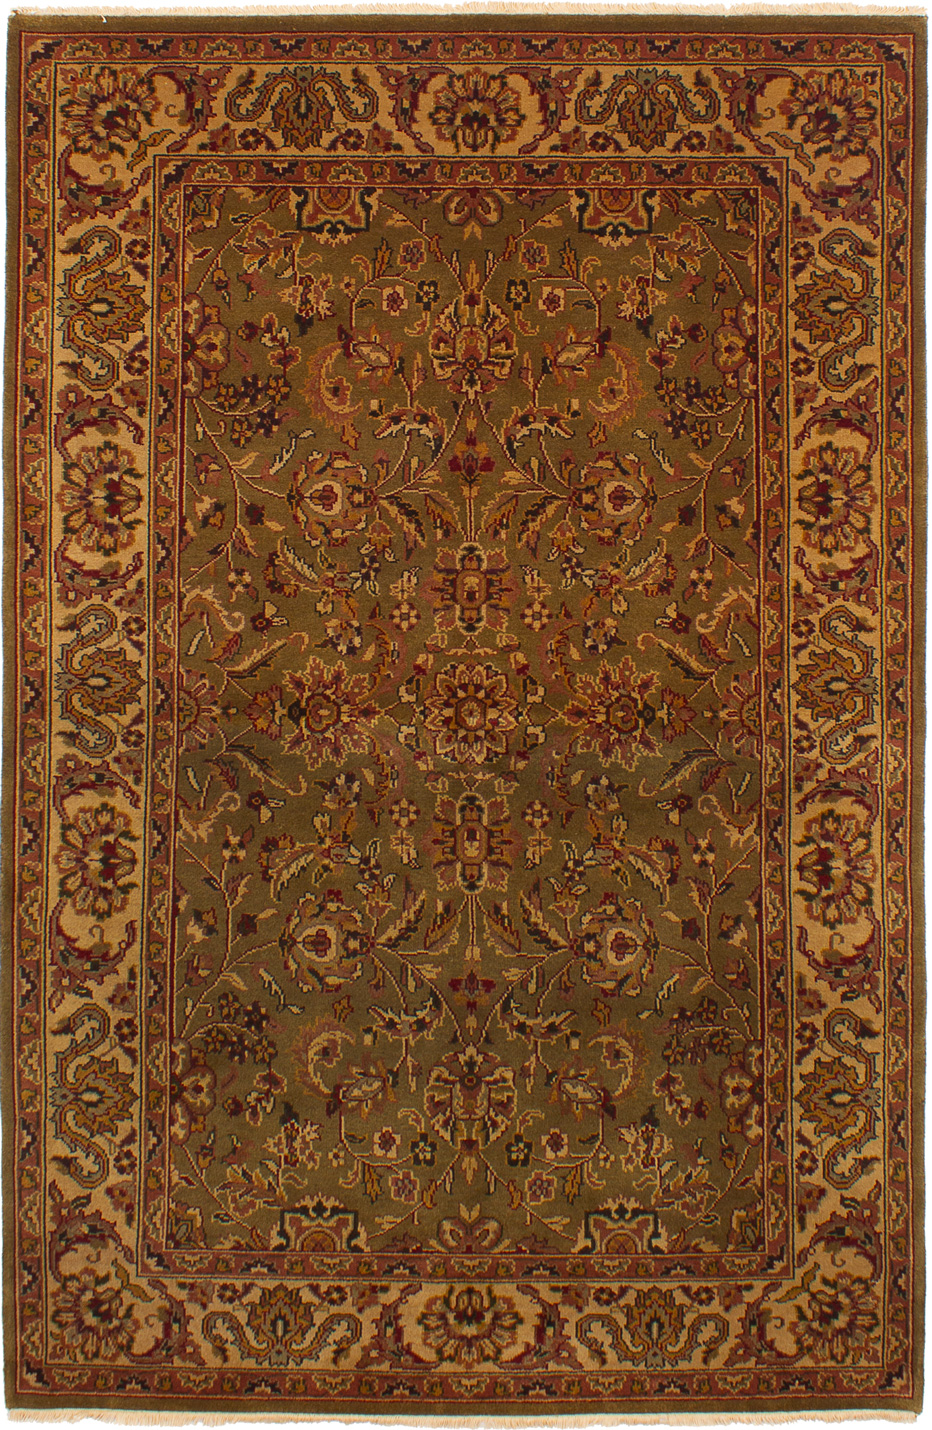 Hand-knotted Finest Agra Jaipur Dark Olive Green Wool Rug 5'6" x 8'5" Size: 5'6" x 8'5"  